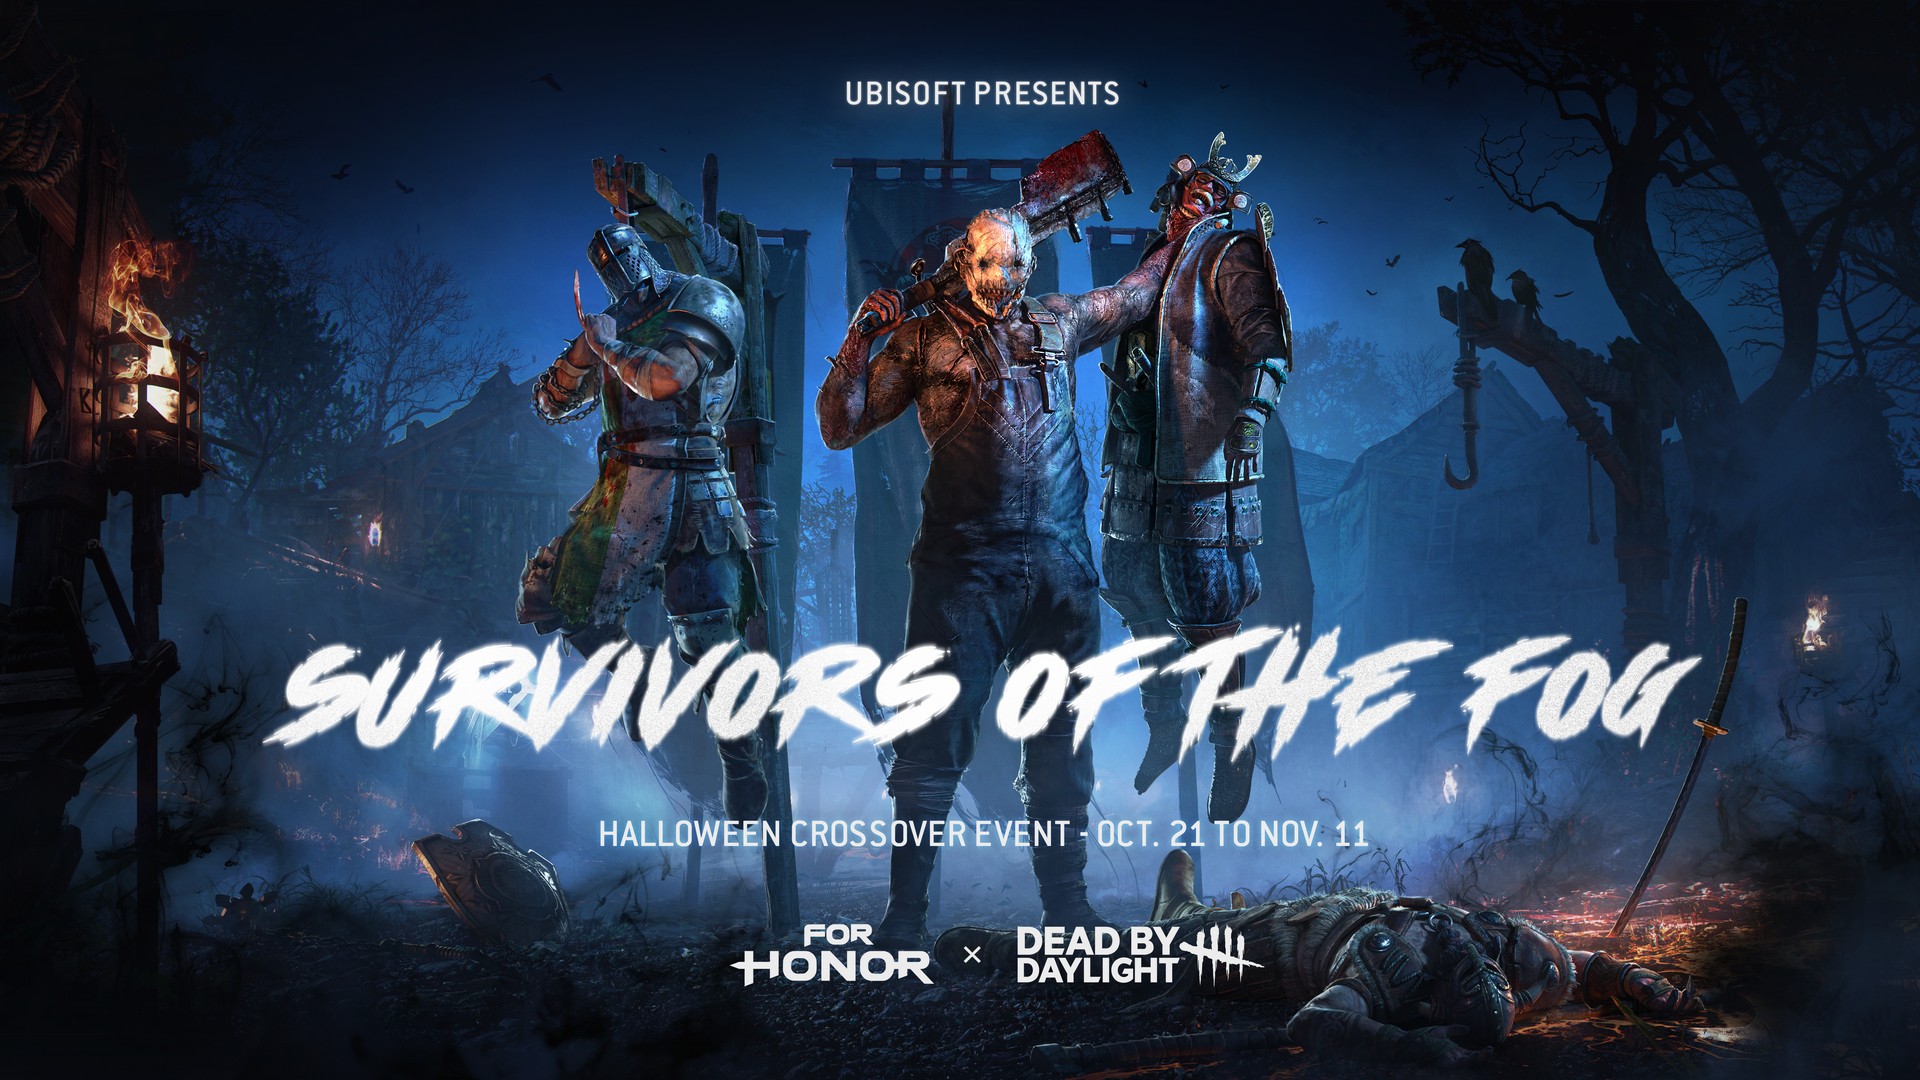 For Honor Heroes Clash With The Dead By Daylight Trapper In New Halloween Game Mode Available Tomorrow